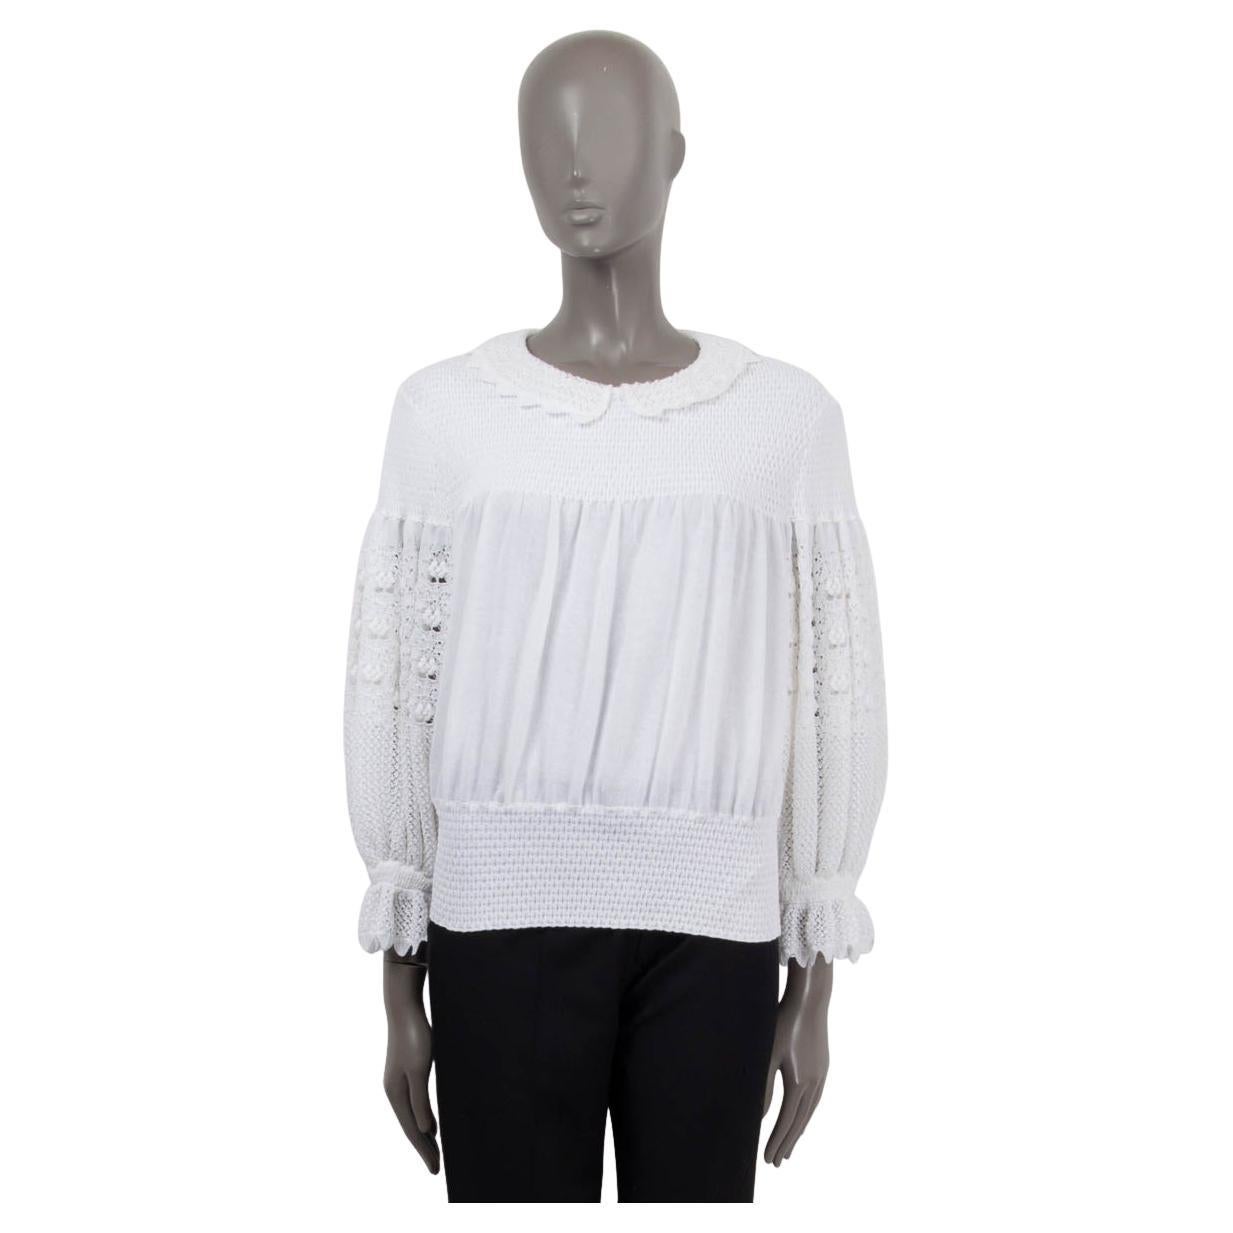 CHANEL white cotton 2020 20S PETER PAN BALLOON SLEEVE Sweater 38 S